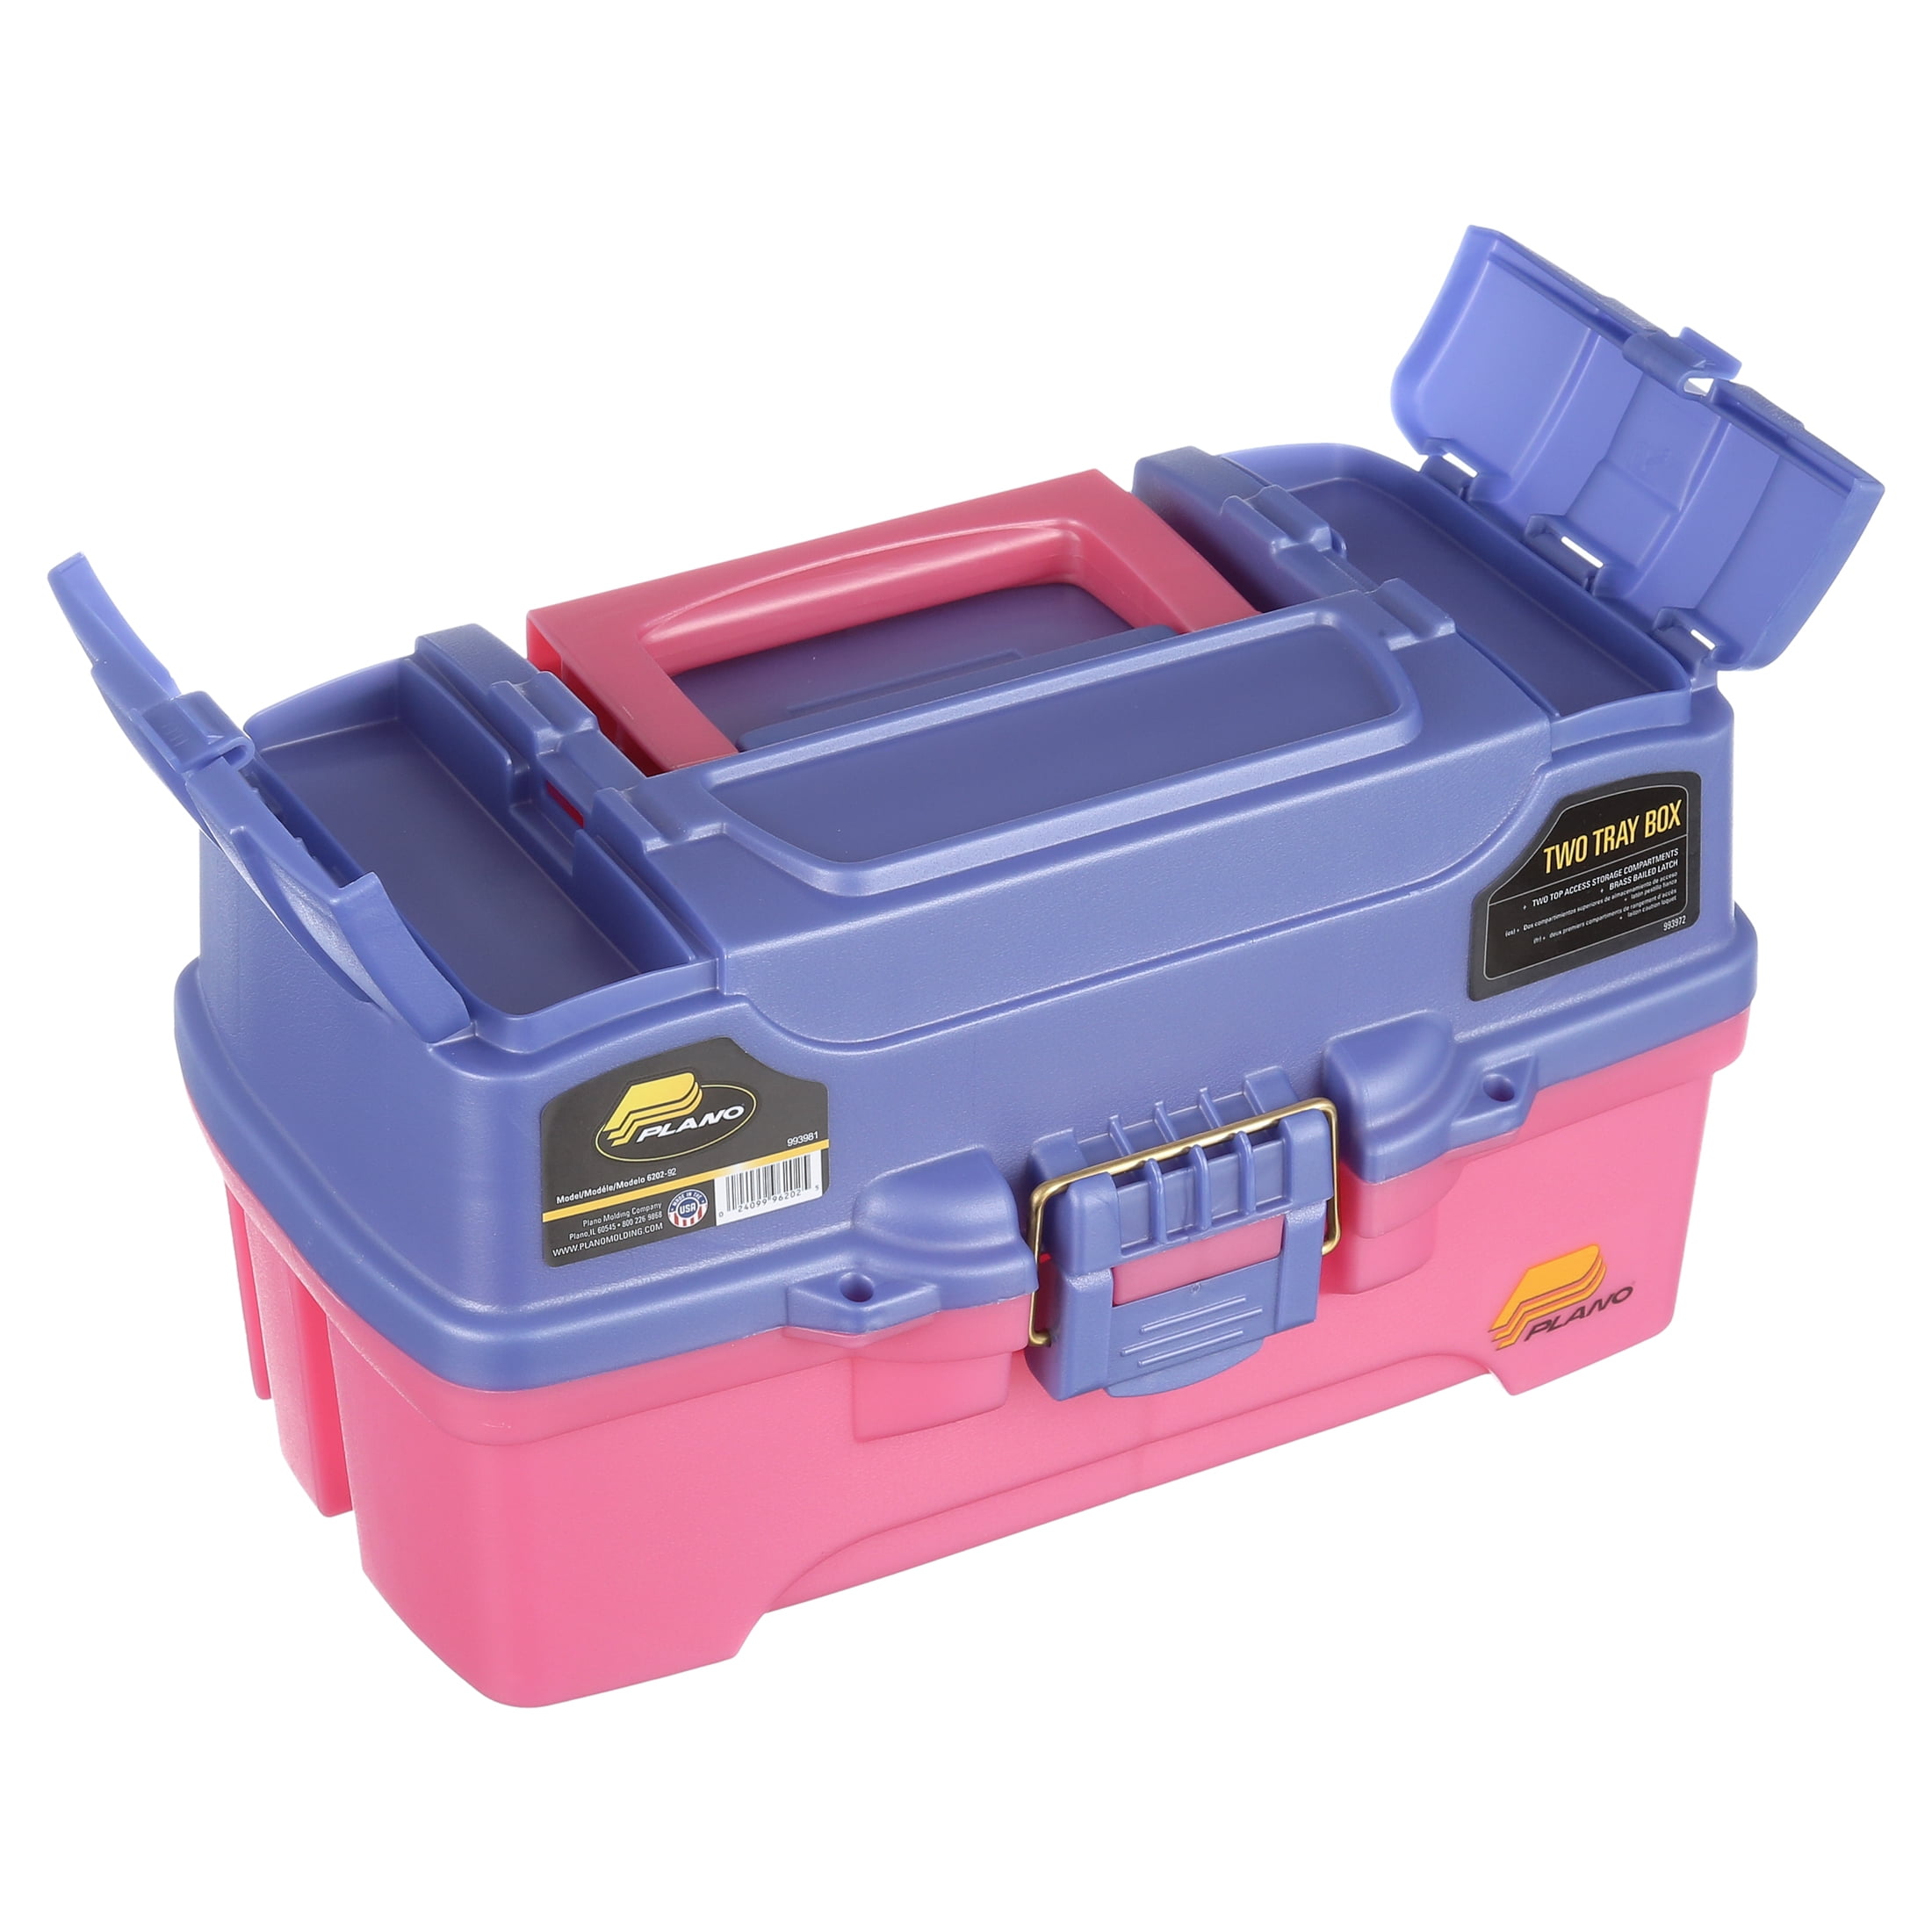 Plano Two Tray Fishing Tackle Box - Model: 6202-92 - Pink/Periwinkle 